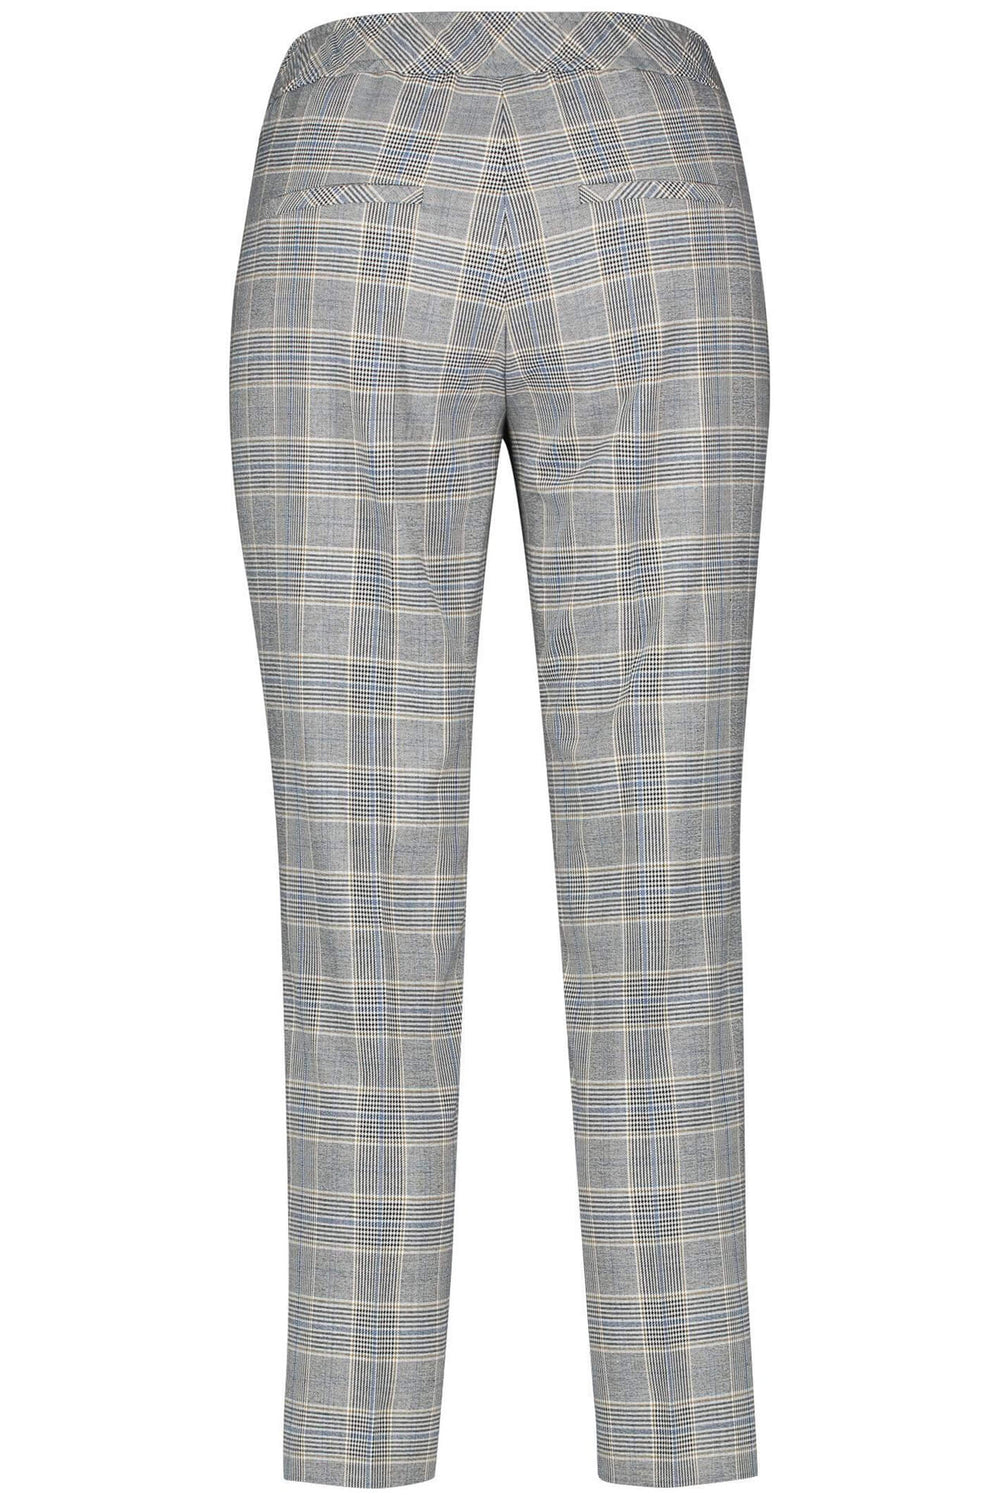 Gerry Weber 220012-31342 Grey Check Trousers - Dotique Chesterfield